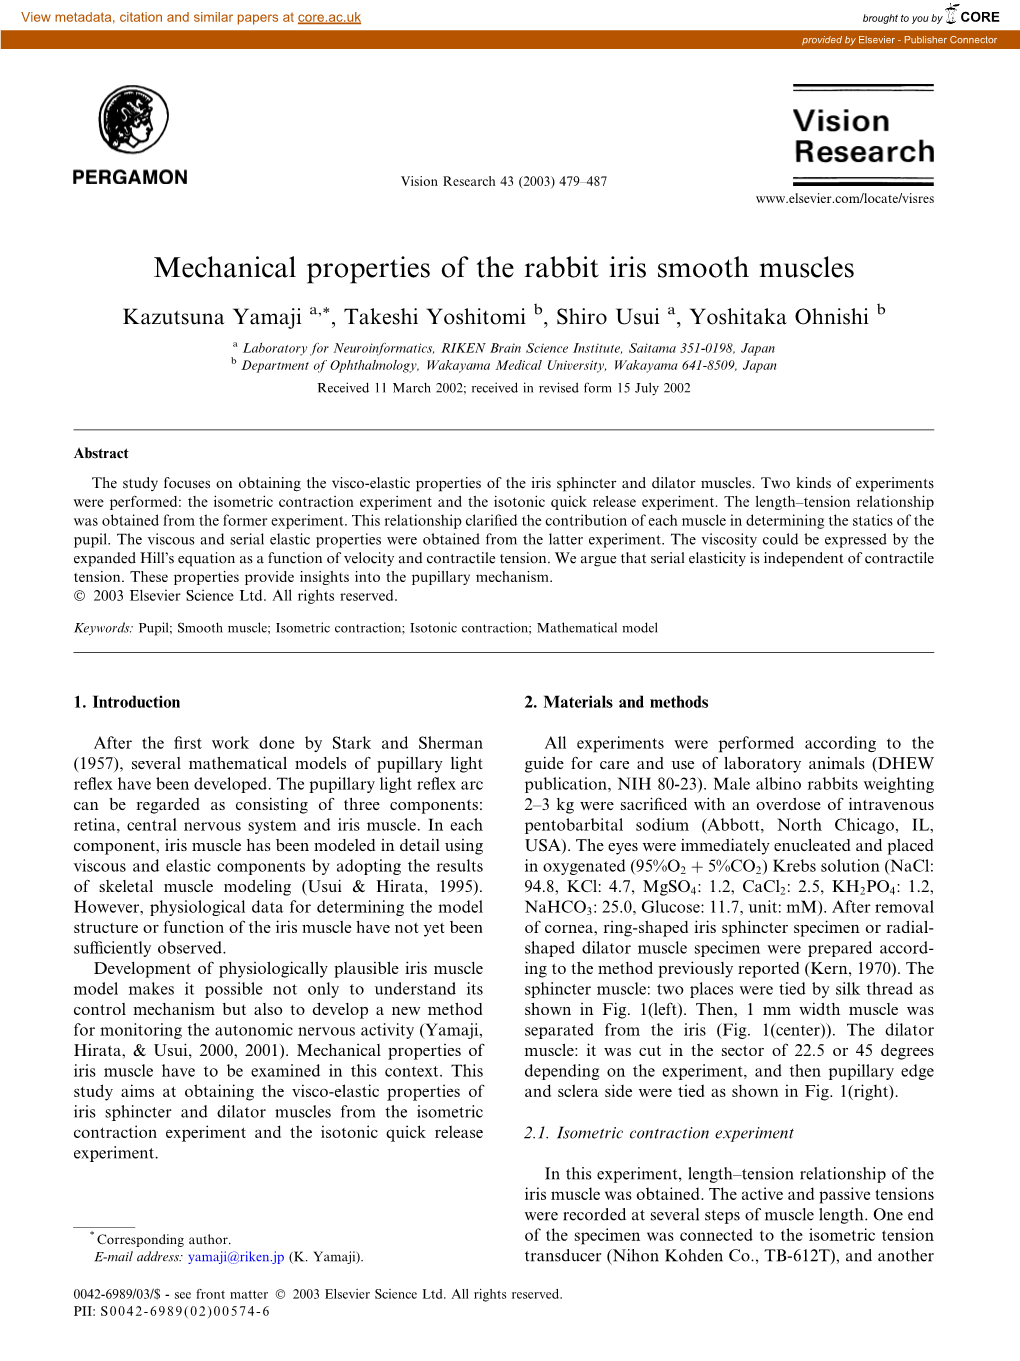 Mechanical Properties of the Rabbit Iris Smooth Muscles